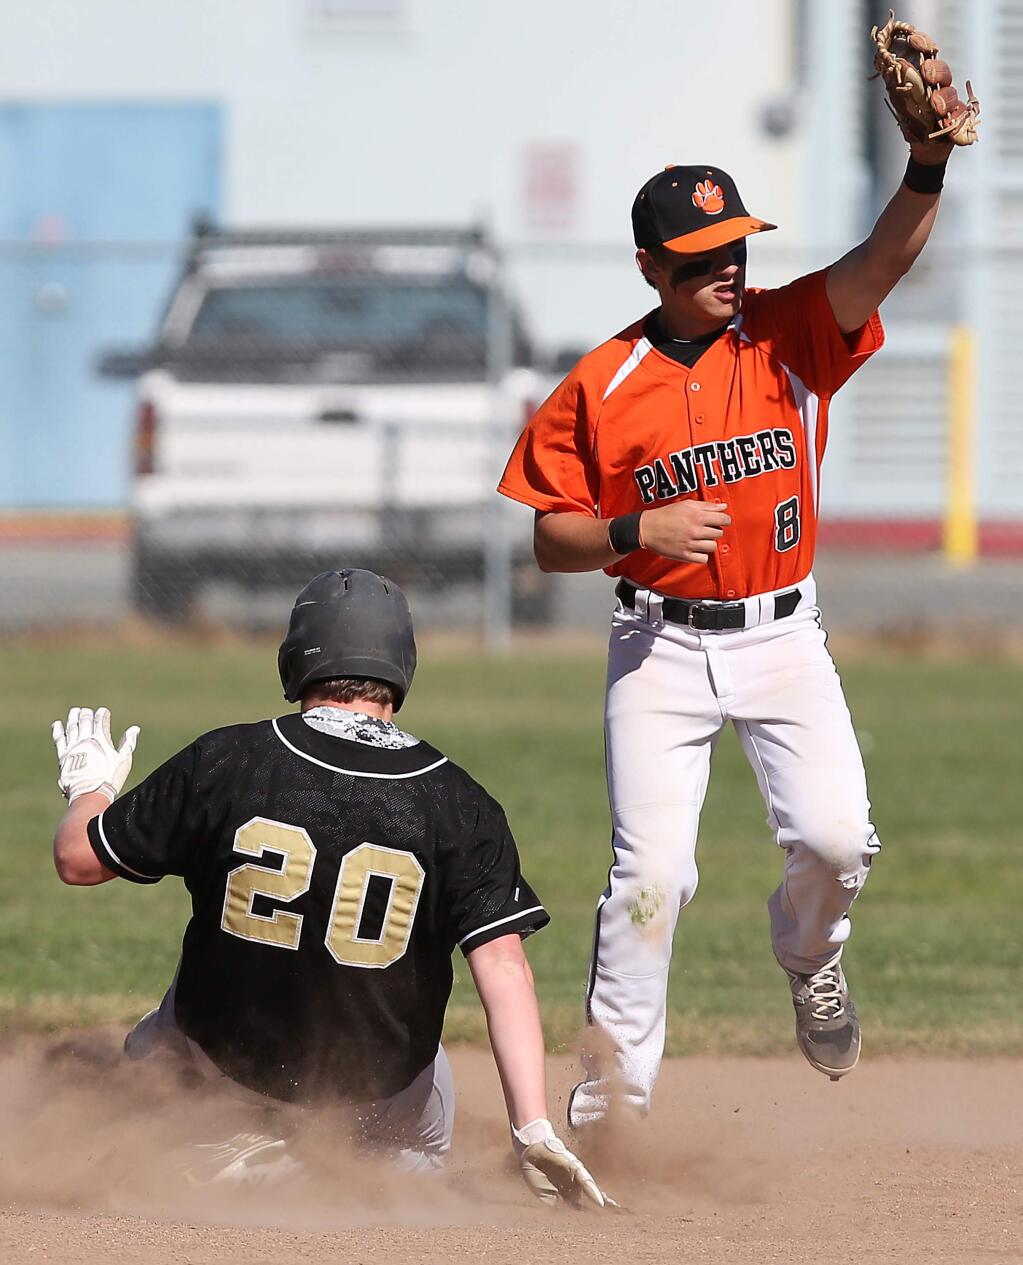 Windsor's John Plinski slides safely into second as the ball comes late to Santa Rosa's Nate Turnipseed during the game held at Santa Rosa High School, Wednesday, April 1, 2015. (Crista Jeremiason / The Press Democrat)